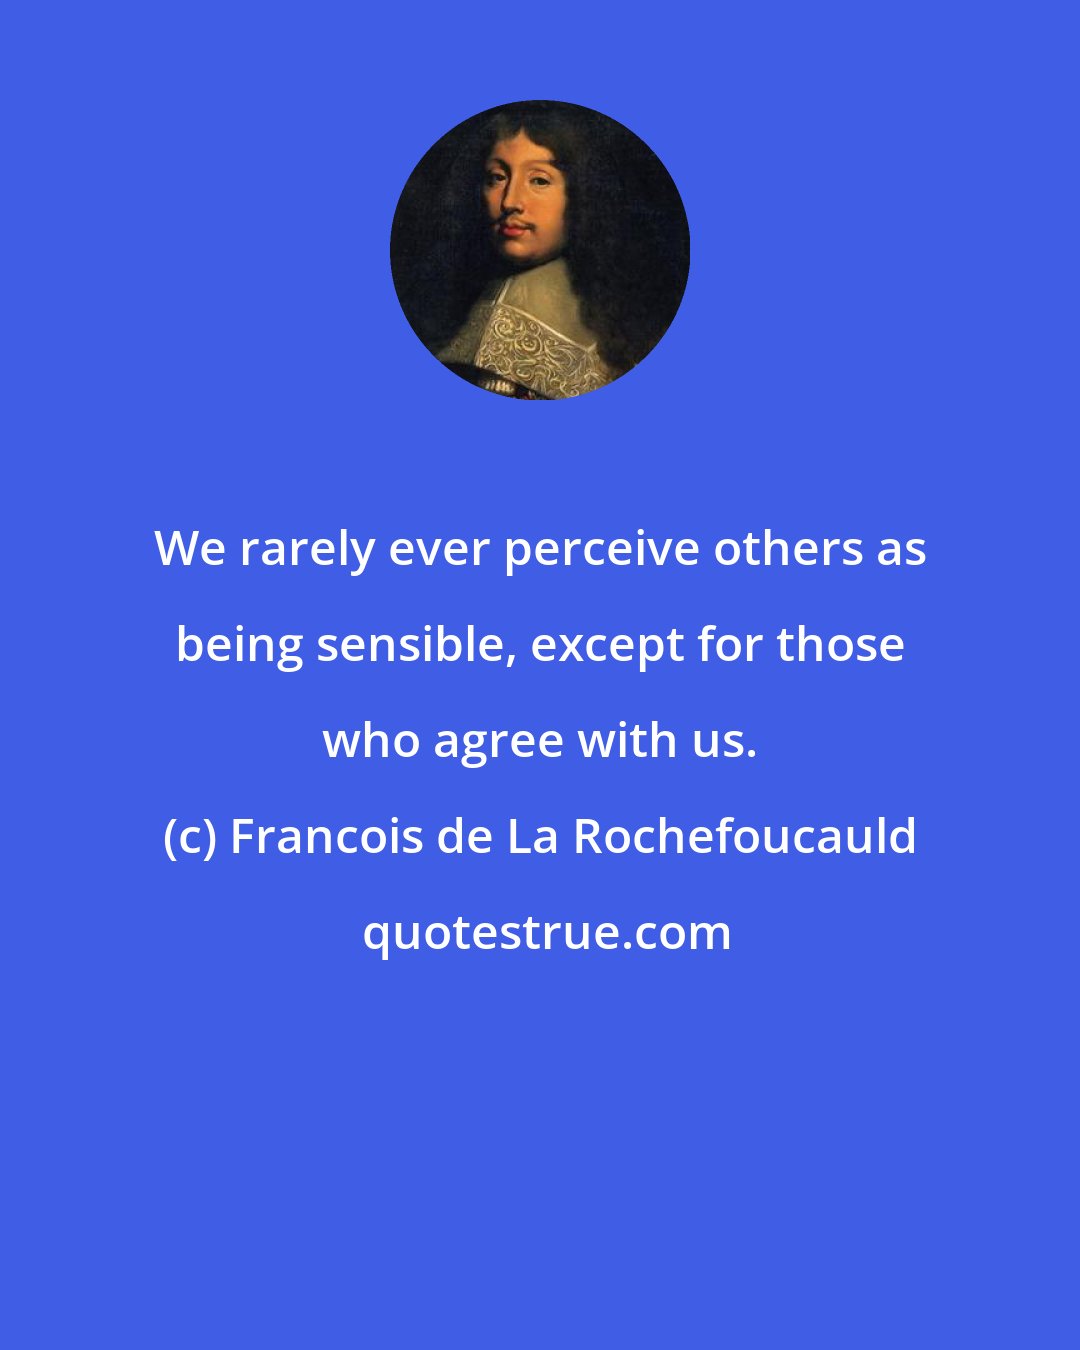 Francois de La Rochefoucauld: We rarely ever perceive others as being sensible, except for those who agree with us.